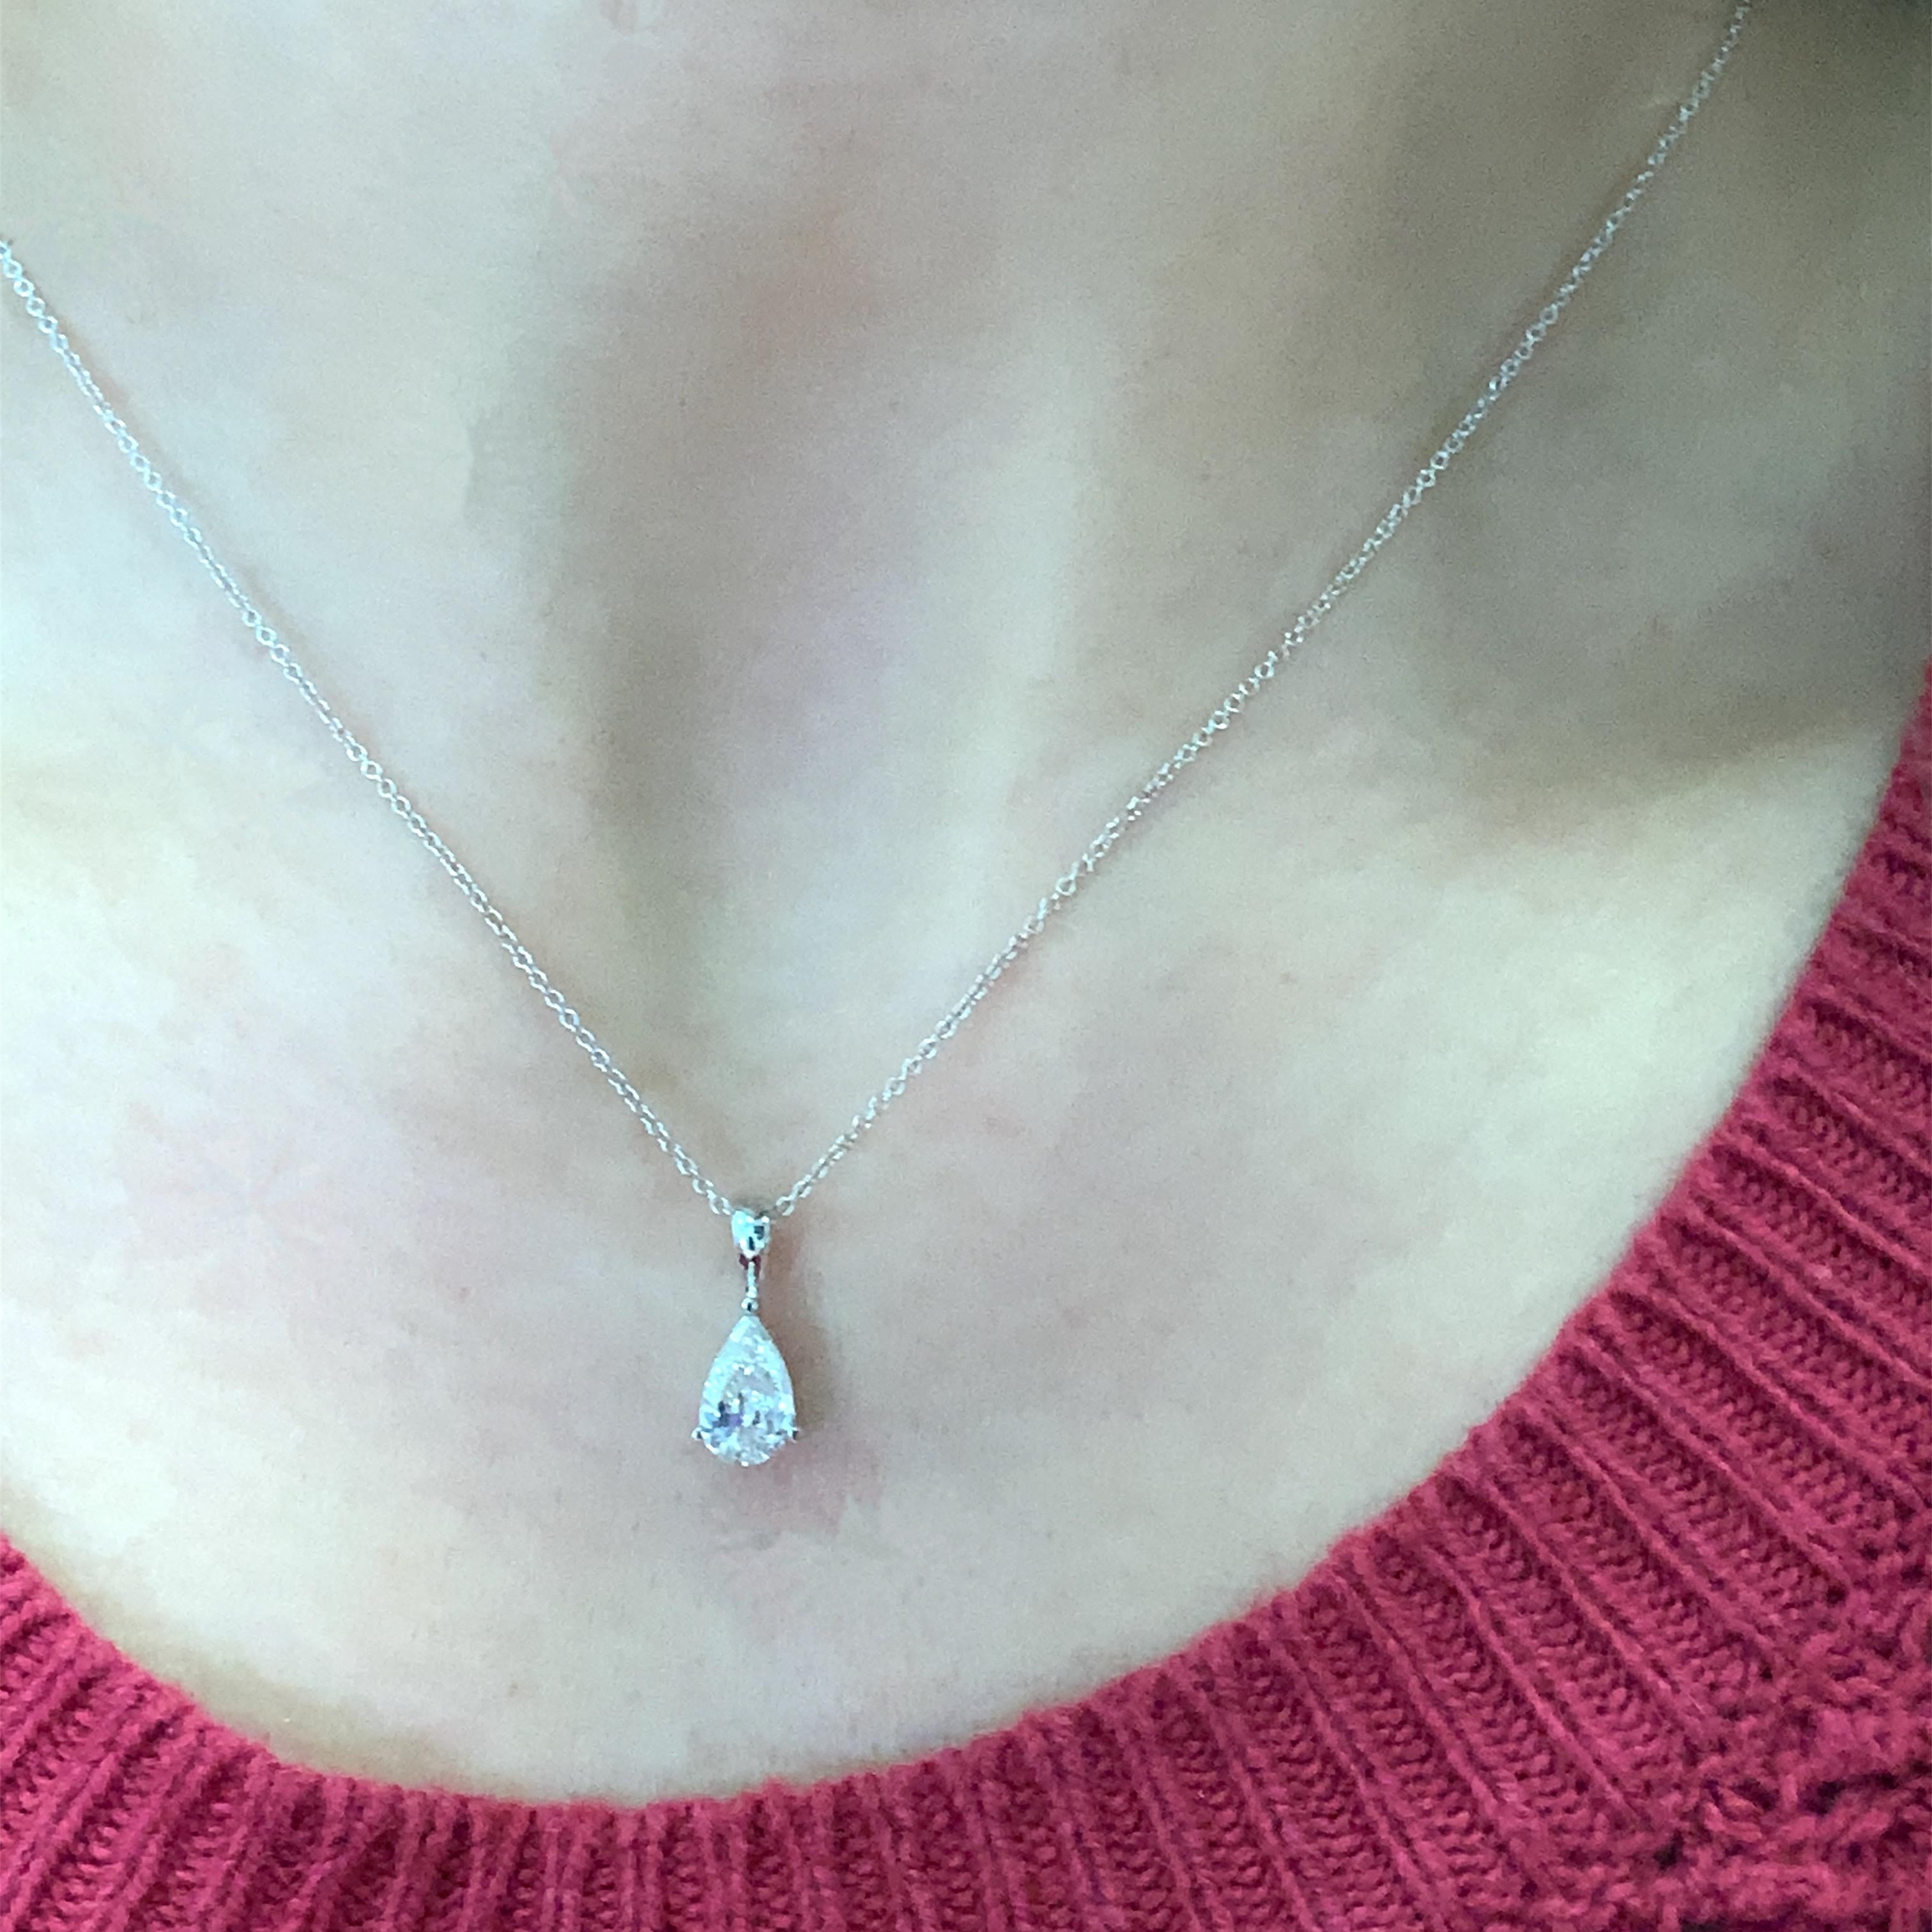 Pear shaped diamond solitaire pendant necklace 18k white gold
Classic pear shaped diamond solitaire pendant necklace in 18k white gold
Diamond total weight 0.68ct G colour VS1 clarity
Chain length 18 inches
Pear cut solitaire diamond drop pendant